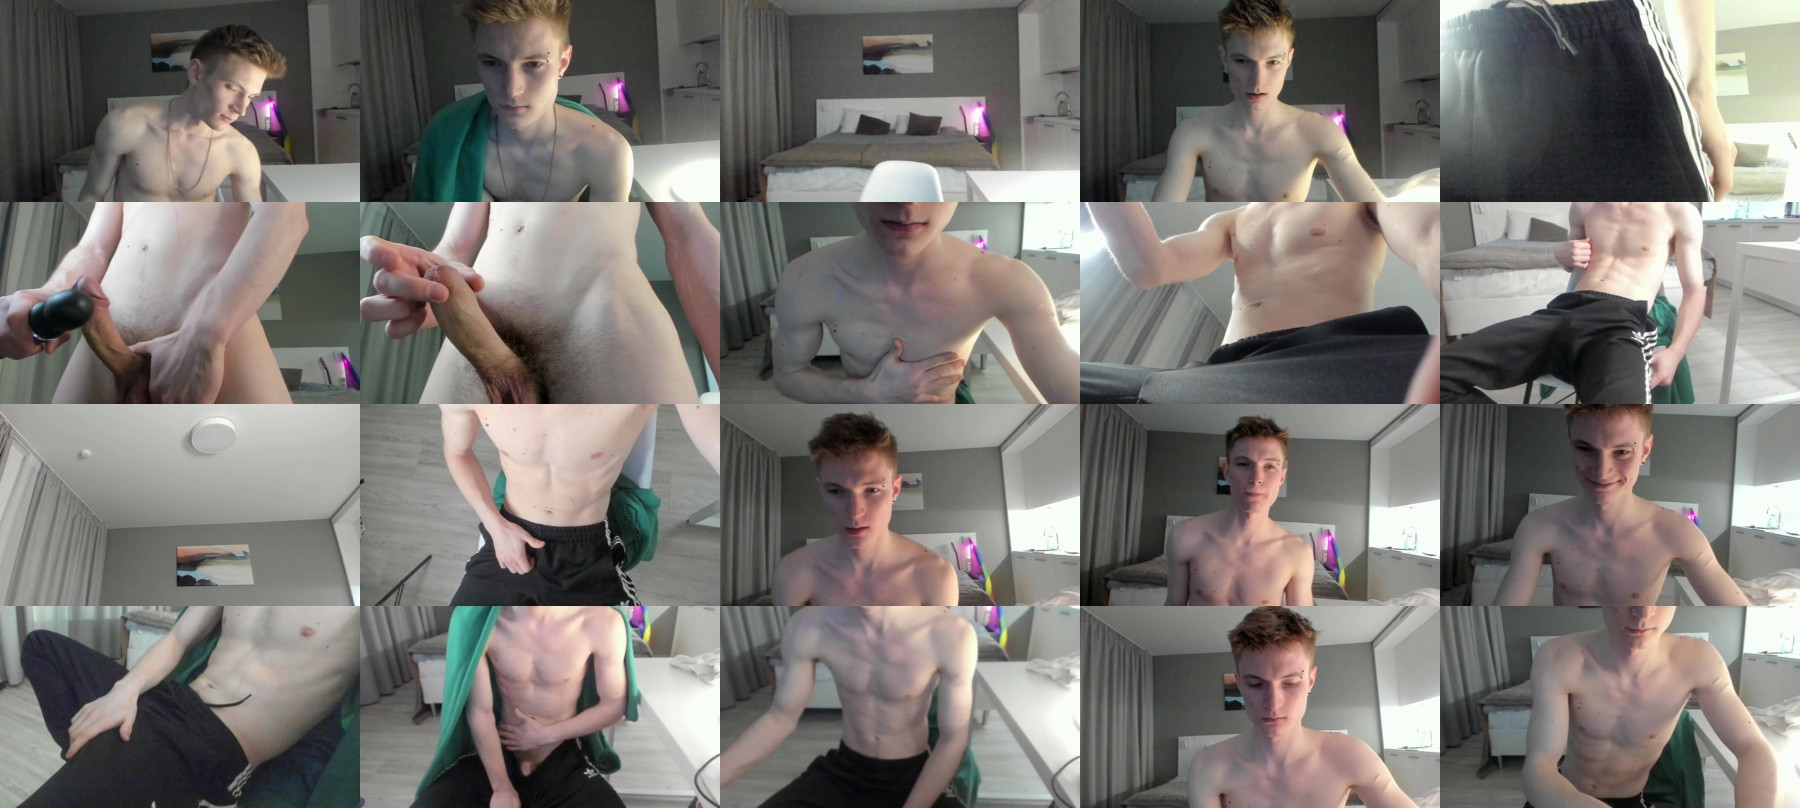 Viksons  23-04-2021 Male Topless